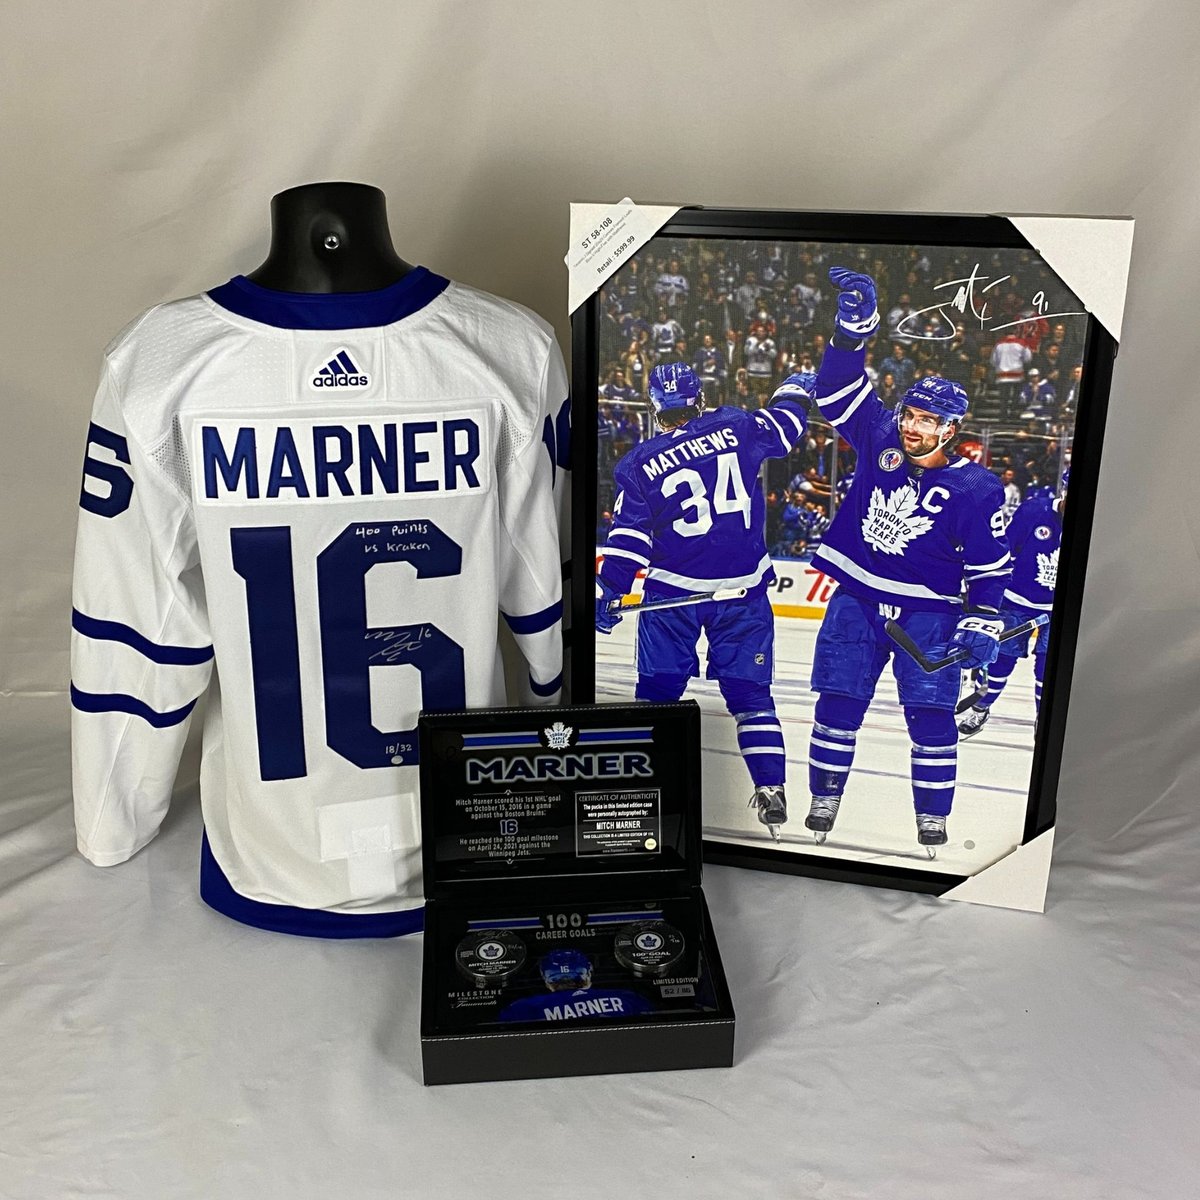 Doug Gilmour autographed 12 x 18 Maple Leafs Jersey Collage (with COA )  (69)